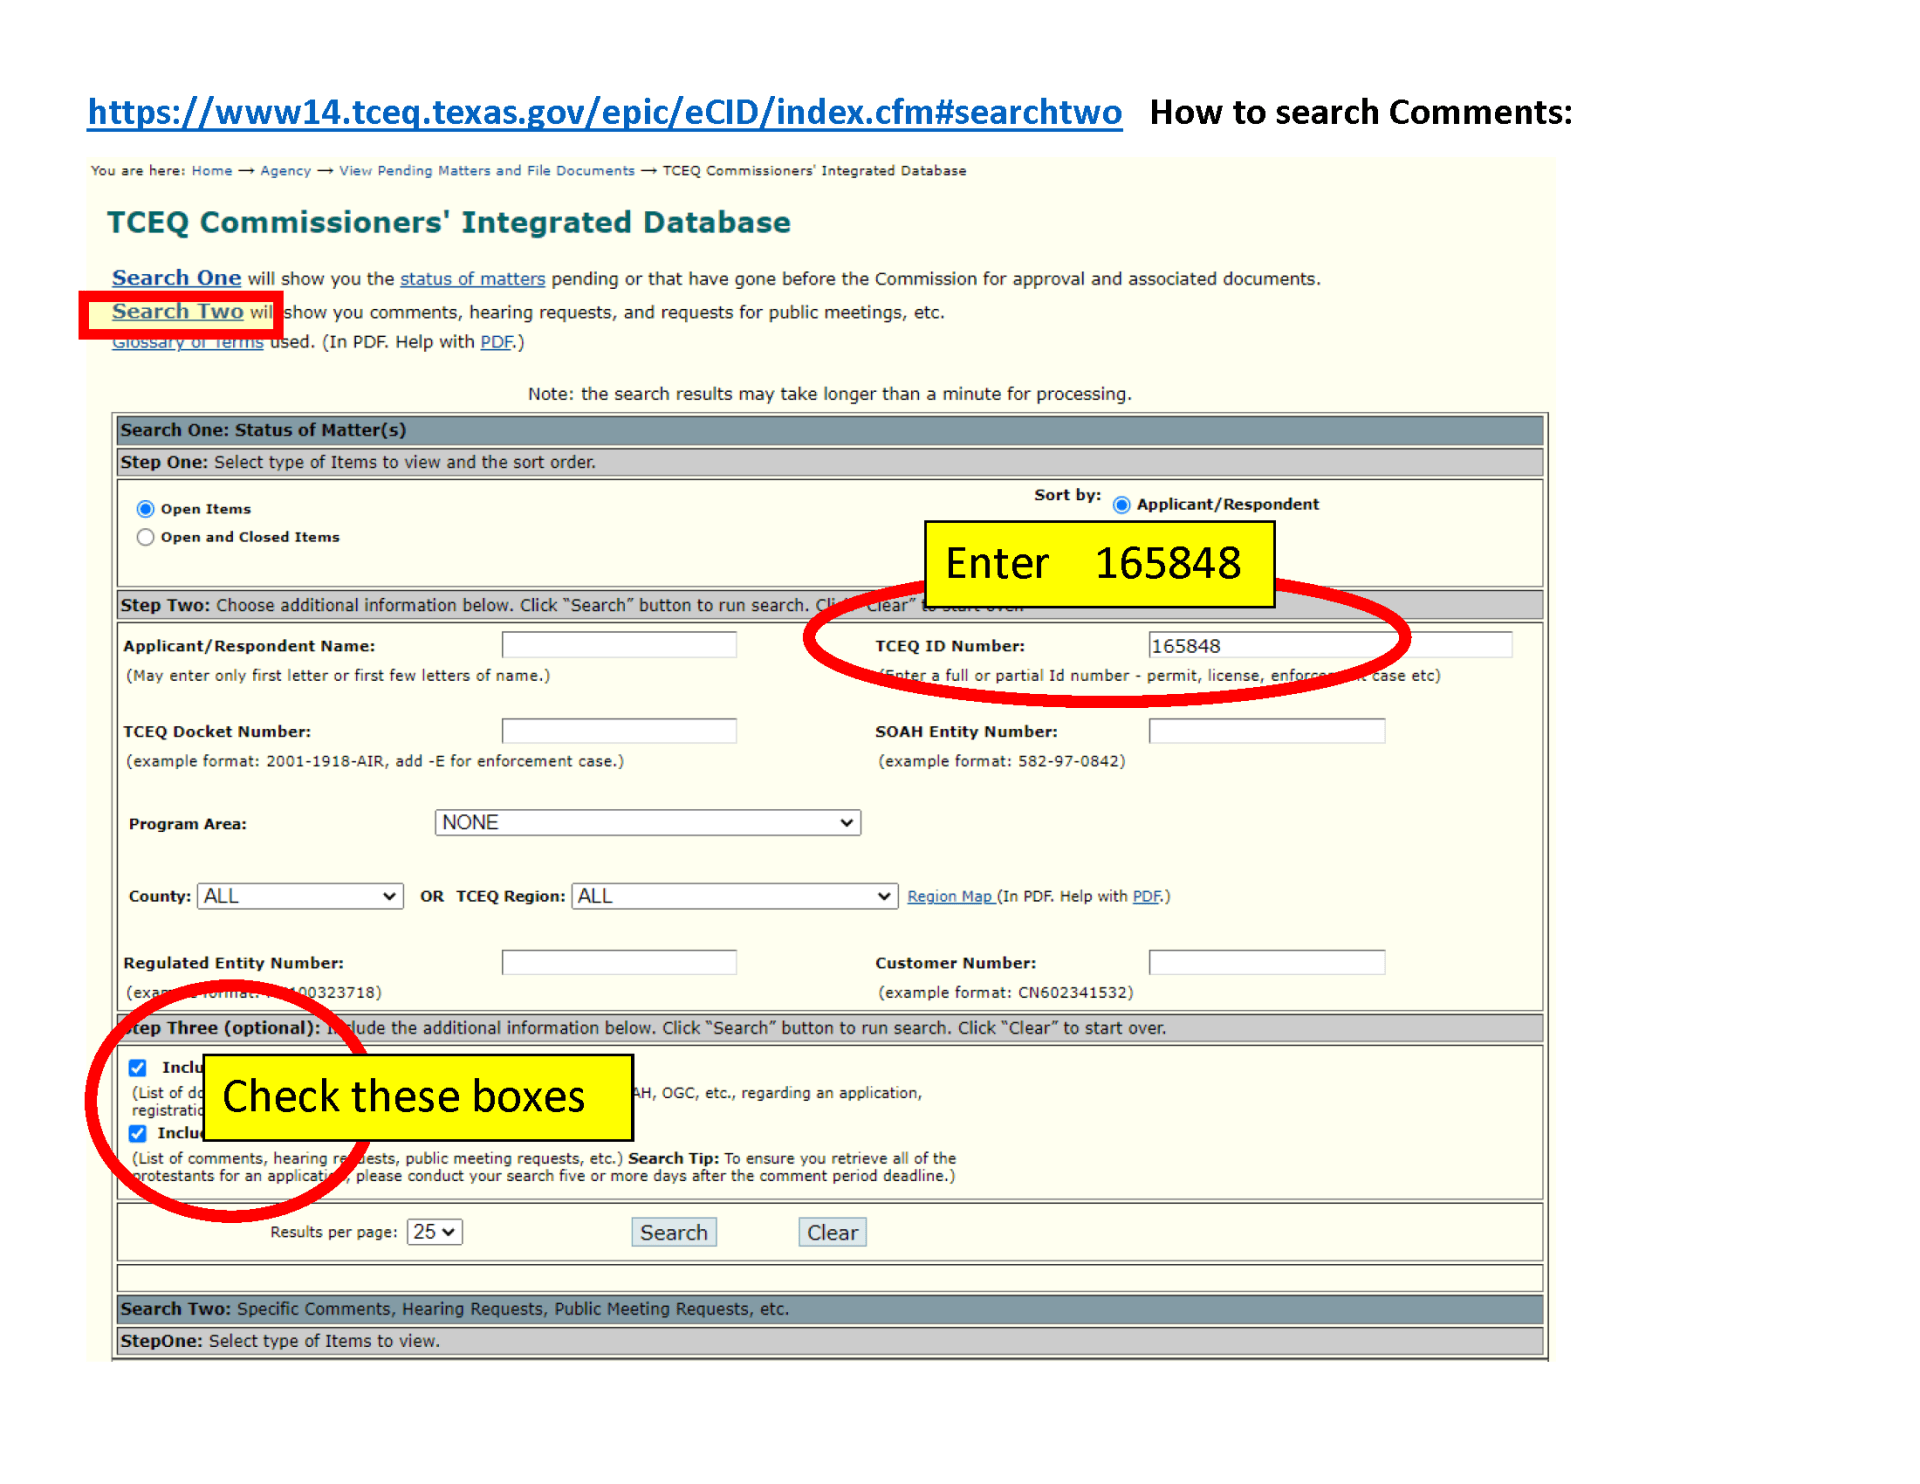 To search comments for the Pending Air Permit 165848 click this image and select search two, enter the permit number 165848 into the TCEQ ID Number form area, and check both boxes in step three, then click search